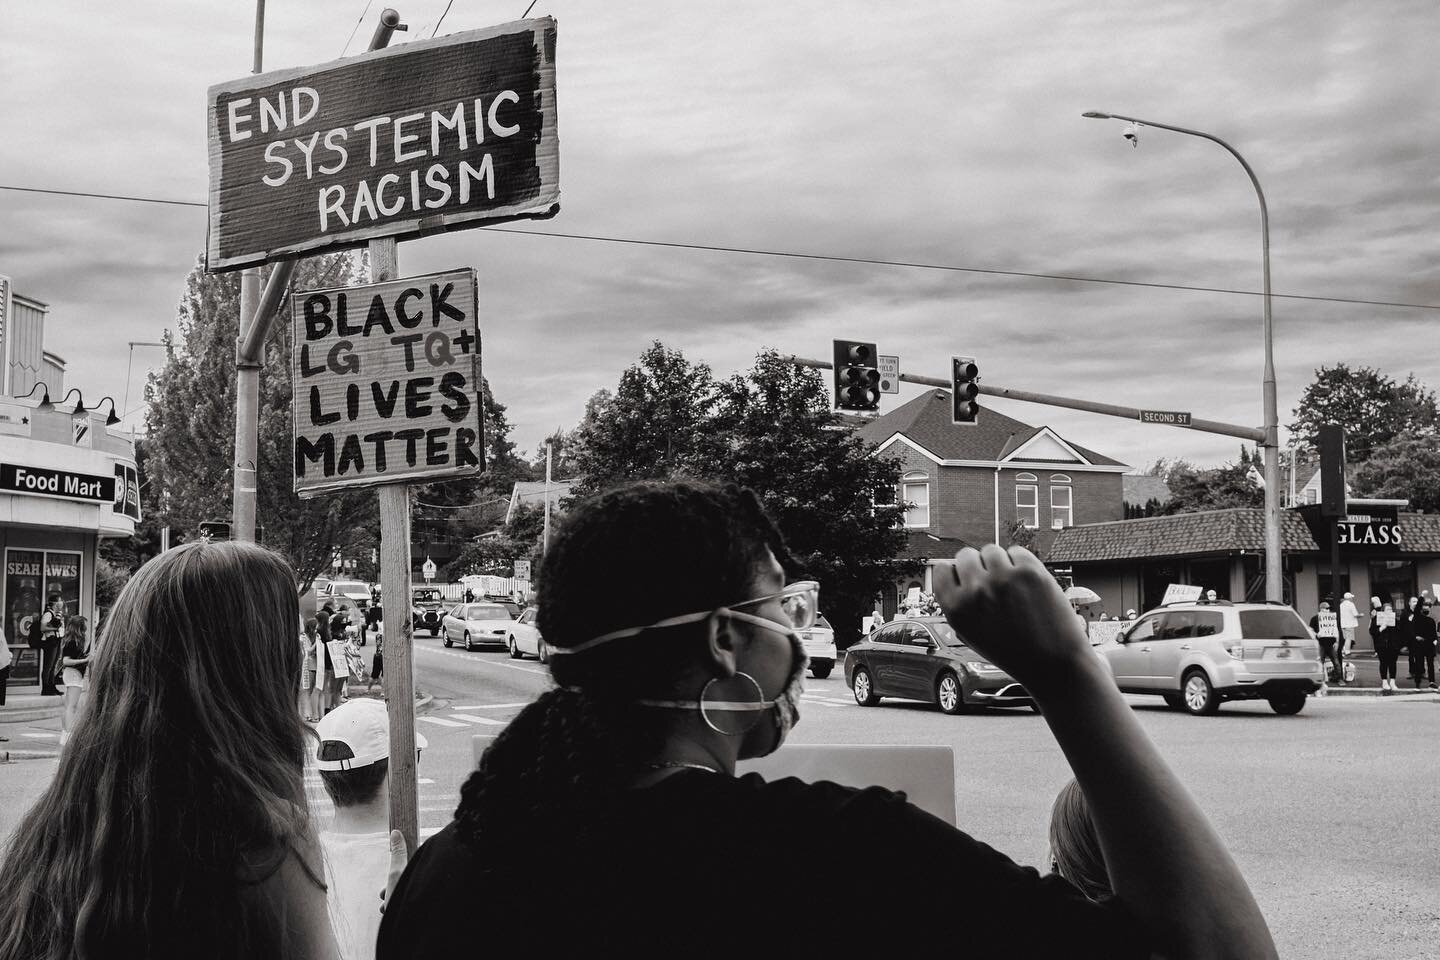 End #systemicracism .
Juneteenth 2020 - Protestors gathered at #Snohomish High for BIPOC to share their experiences of prejudice and racism within the community.
.
.
.
.
.
.
.
.
.
#justiceforgeorgefloyd
#nojusticenopeace✊🏾 #stopracism
#notoracism #e